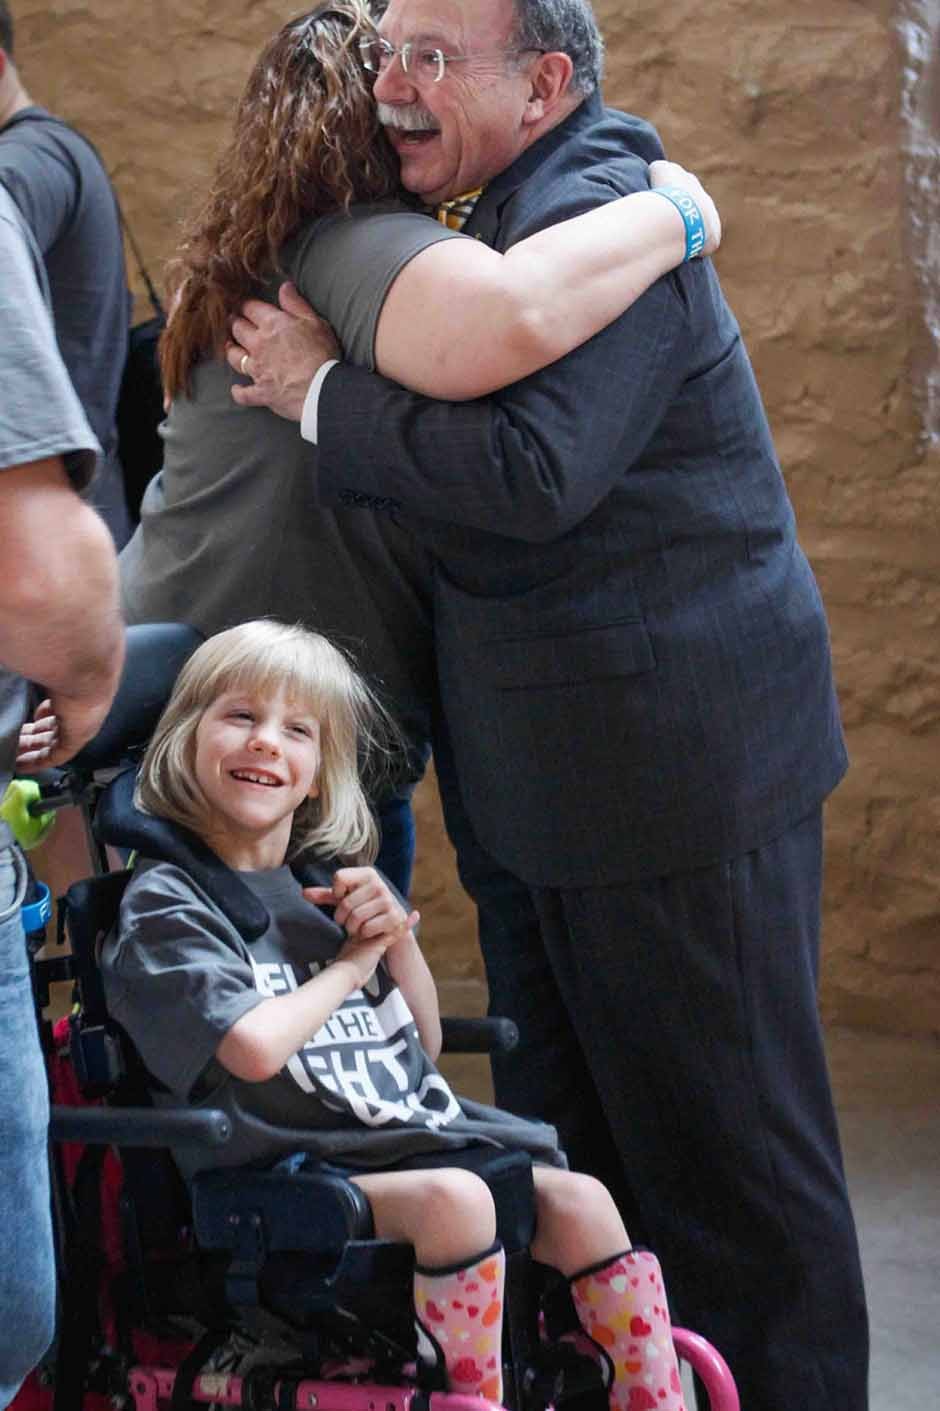 Loftin hugging a woman next to a smilig girl in a wheelchair.